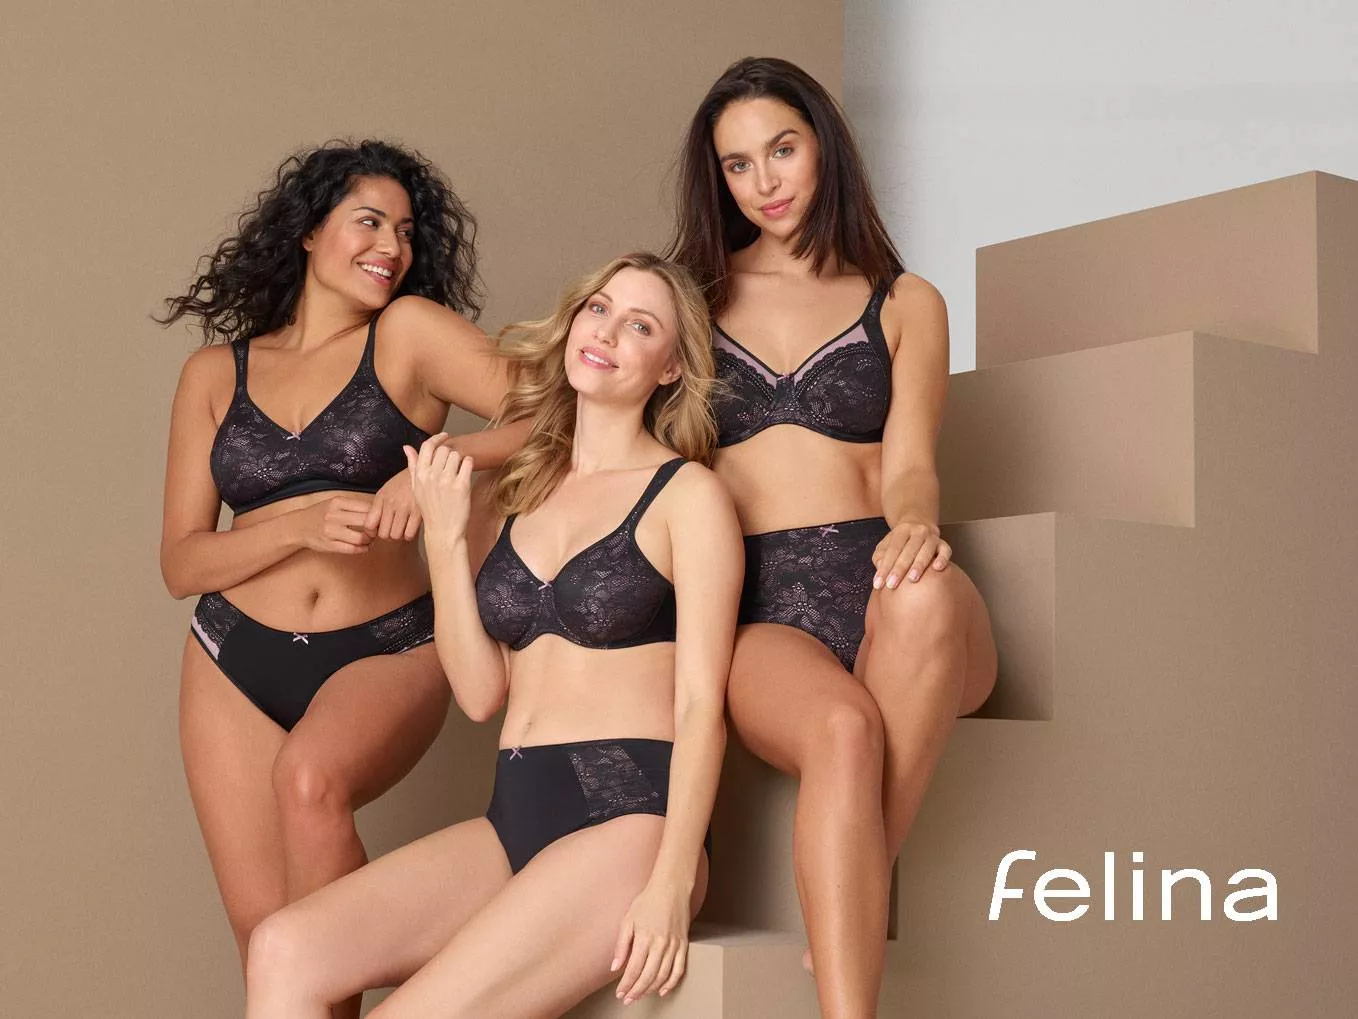 Felina Conturelle Provence brief 048 VANILLA buy for the best price CAD$  84.00 - Canada and U.S. delivery – Bralissimo